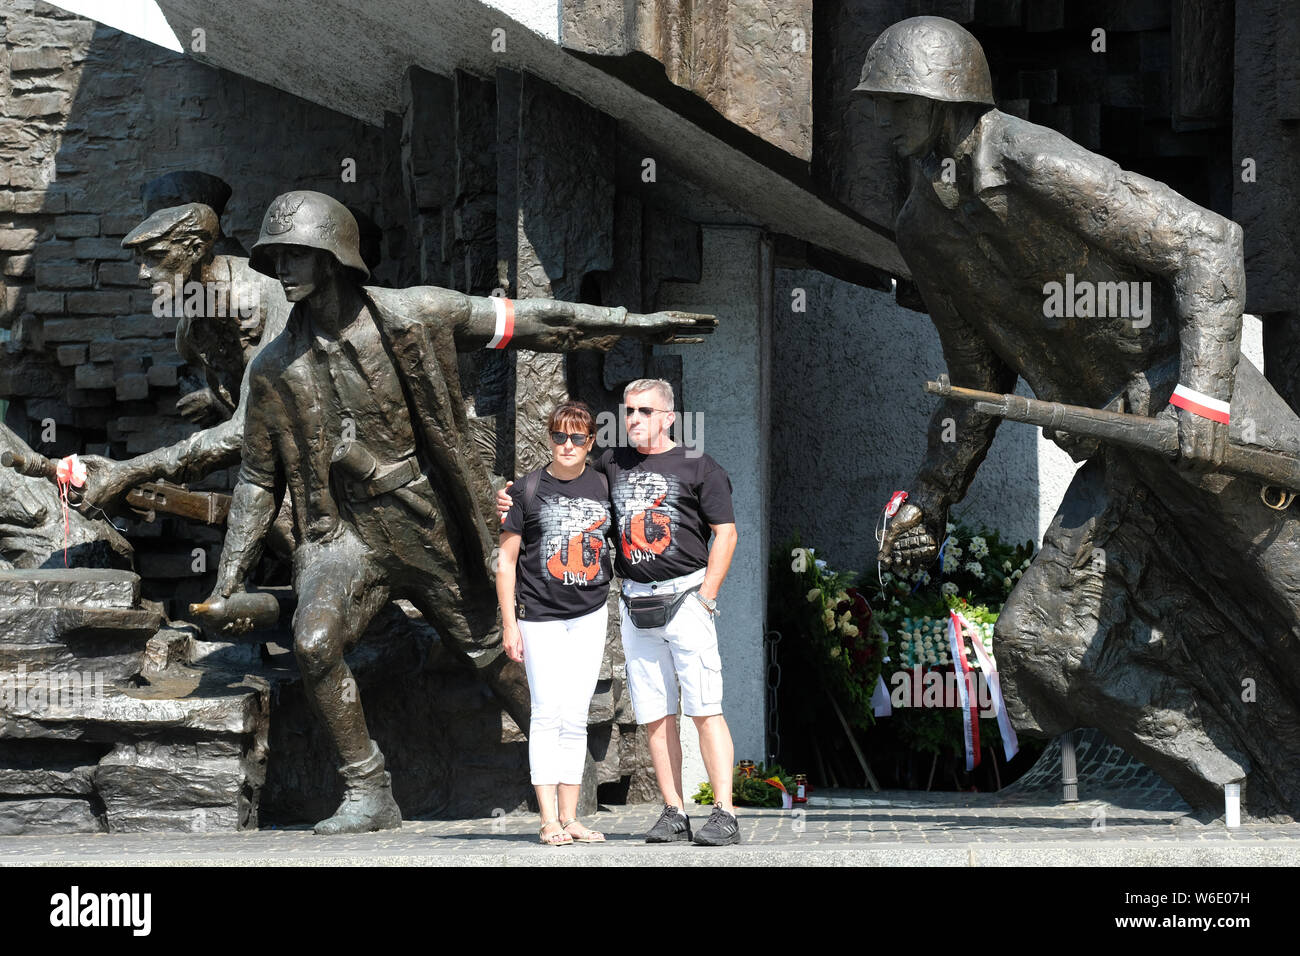 Warsaw Poland - Thursday 1st August - A Polish couple stand proudly in front of the Warsaw Uprising monument in Warsaw as Poland commemorates the 75th Anniversary of the Warsaw Uprising ( Powstanie Warszawskie ) against the occupying German Army on 1st August 1944 - the Warsaw Uprising resistance fighters of the Home Army ( Armia Krajowa  - AK ) struggled on for 63 days against the Nazi forces before capitulation as the advancing Soviet Army waited across the nearby River Vistula. Photo Steven May / Alamy Live News Stock Photo